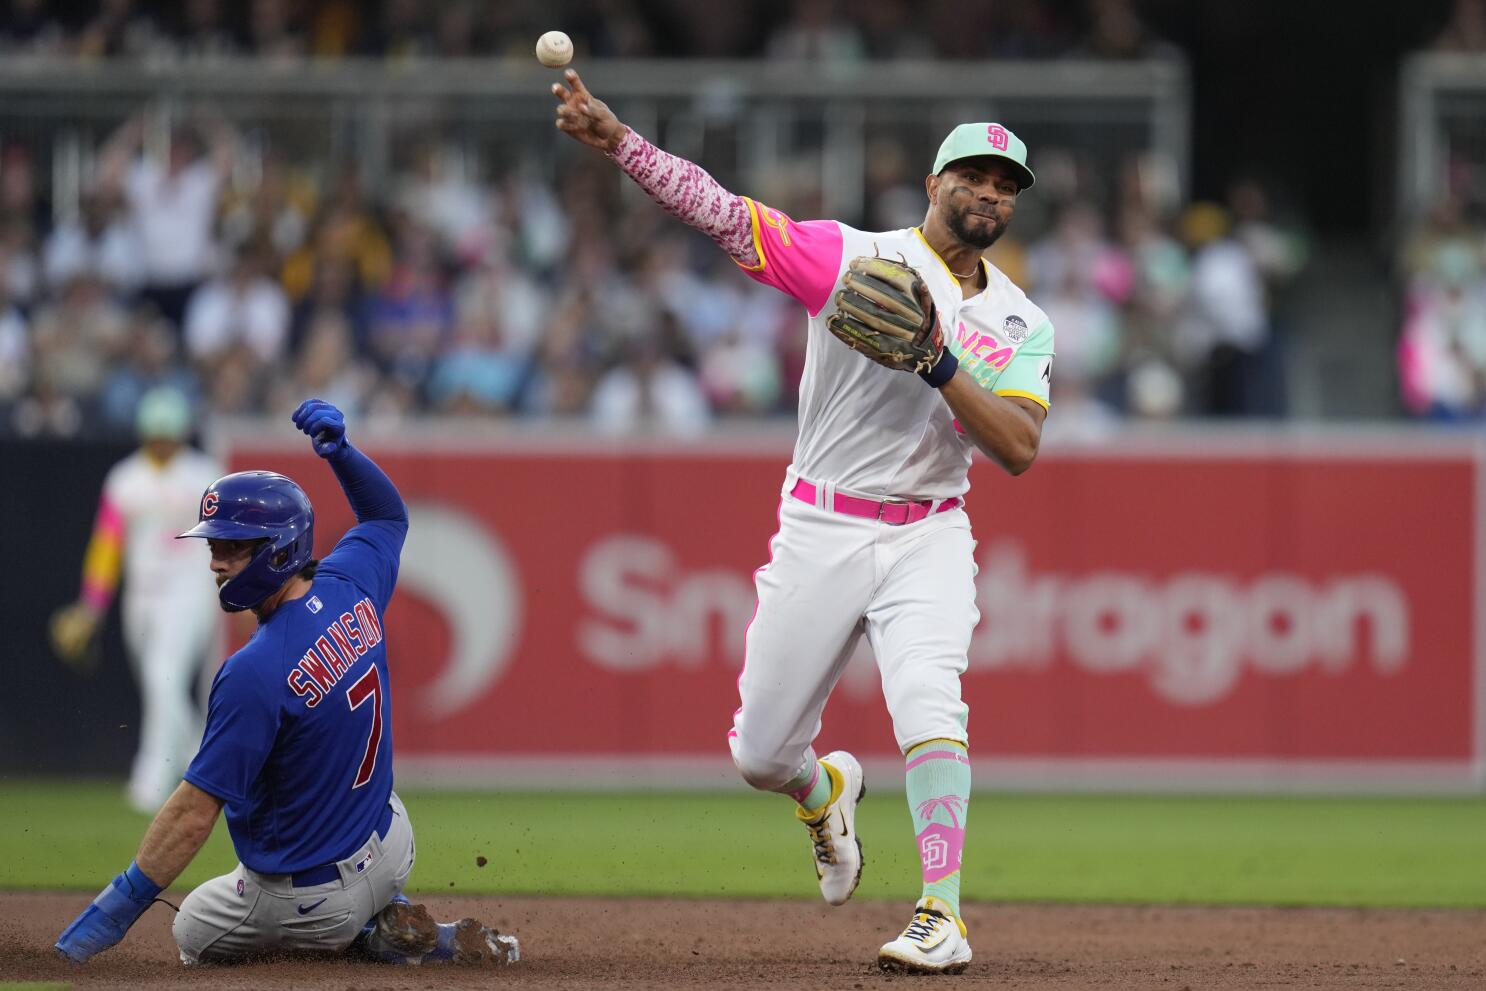 Rougned Odor, Padres agree to Minor League deal